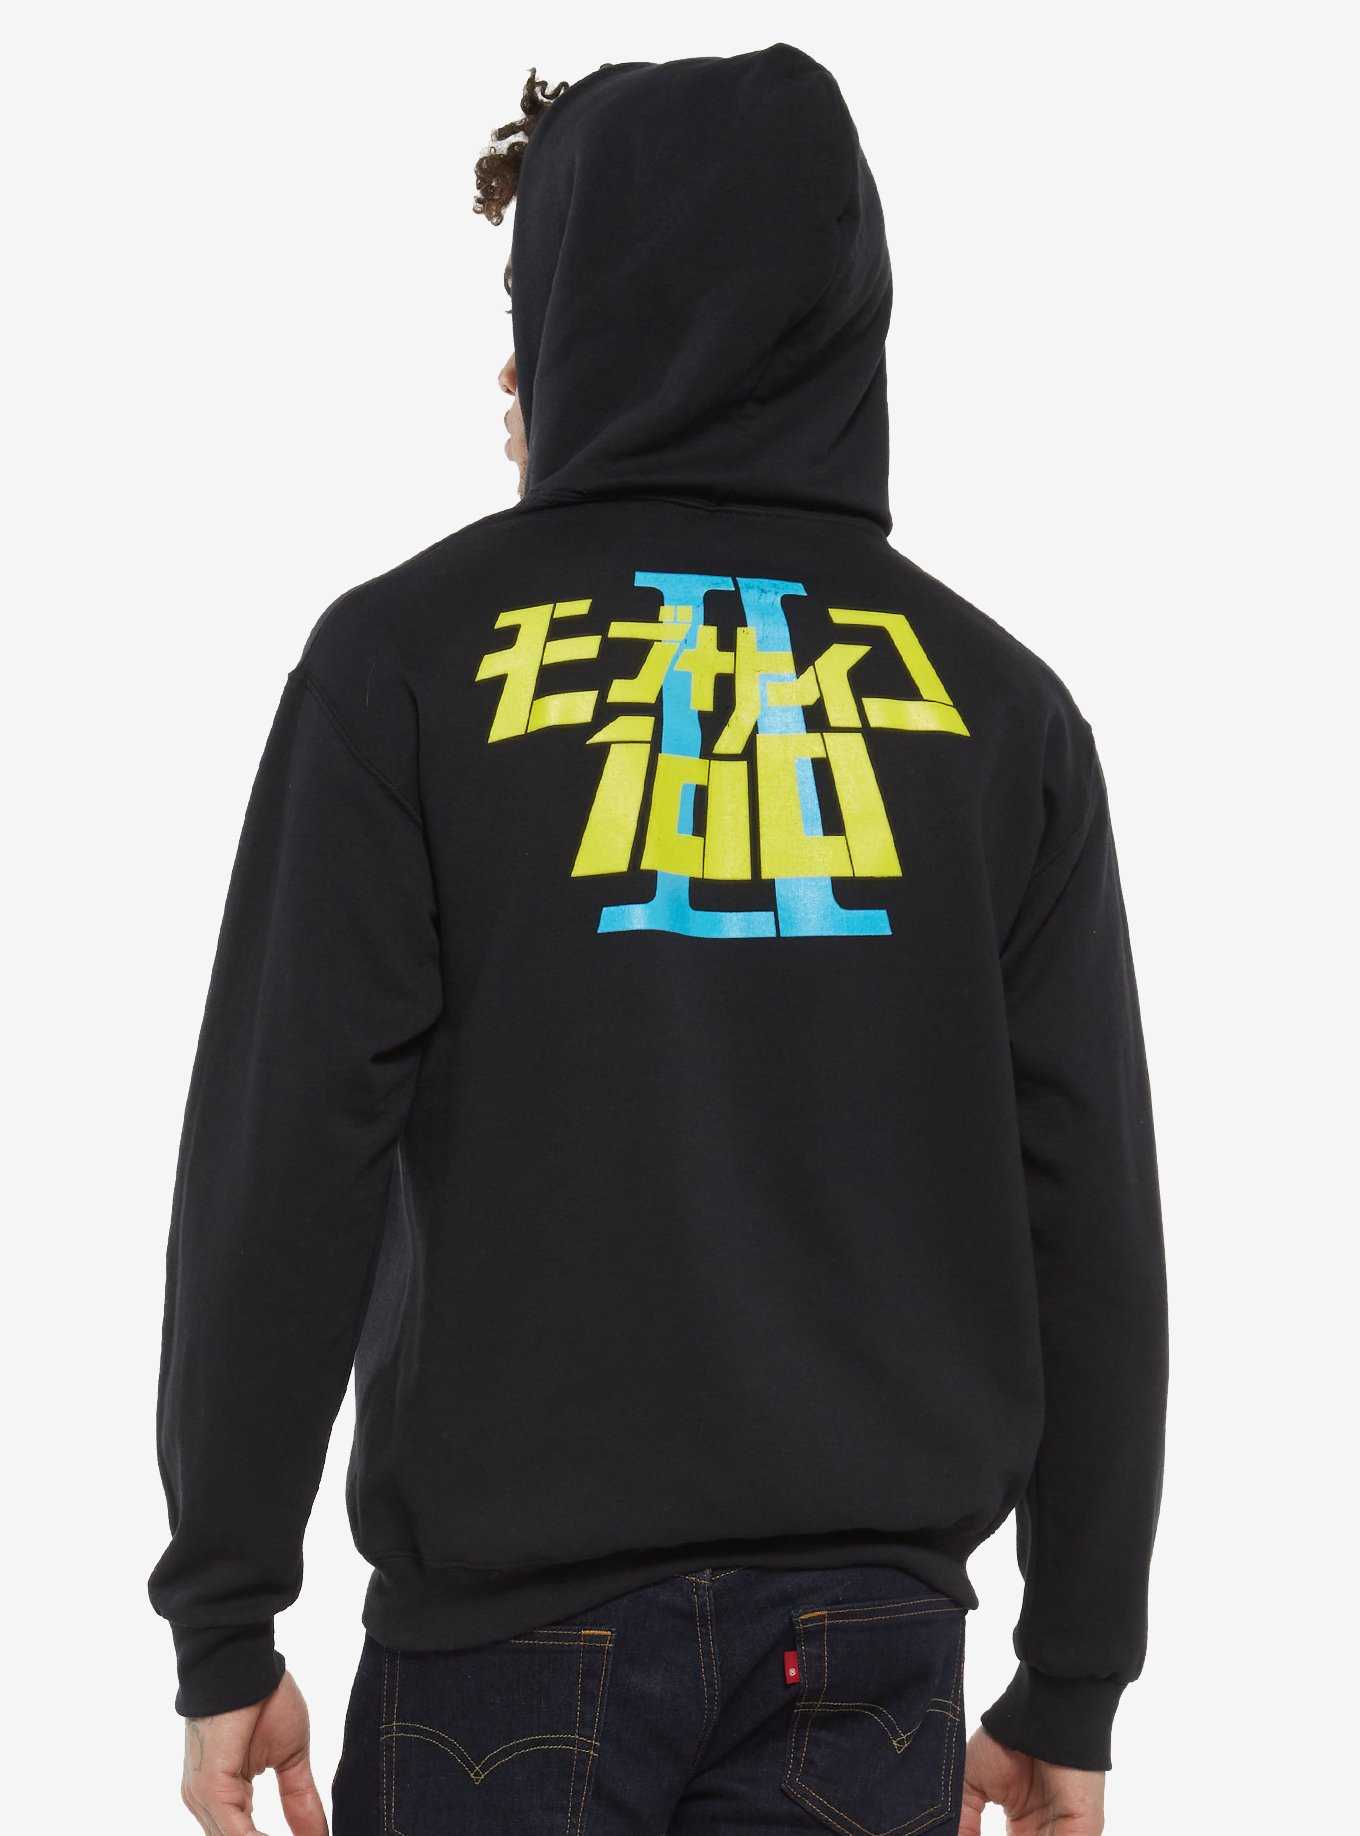 Mob Psycho Double-Sided Hoodie, , hi-res